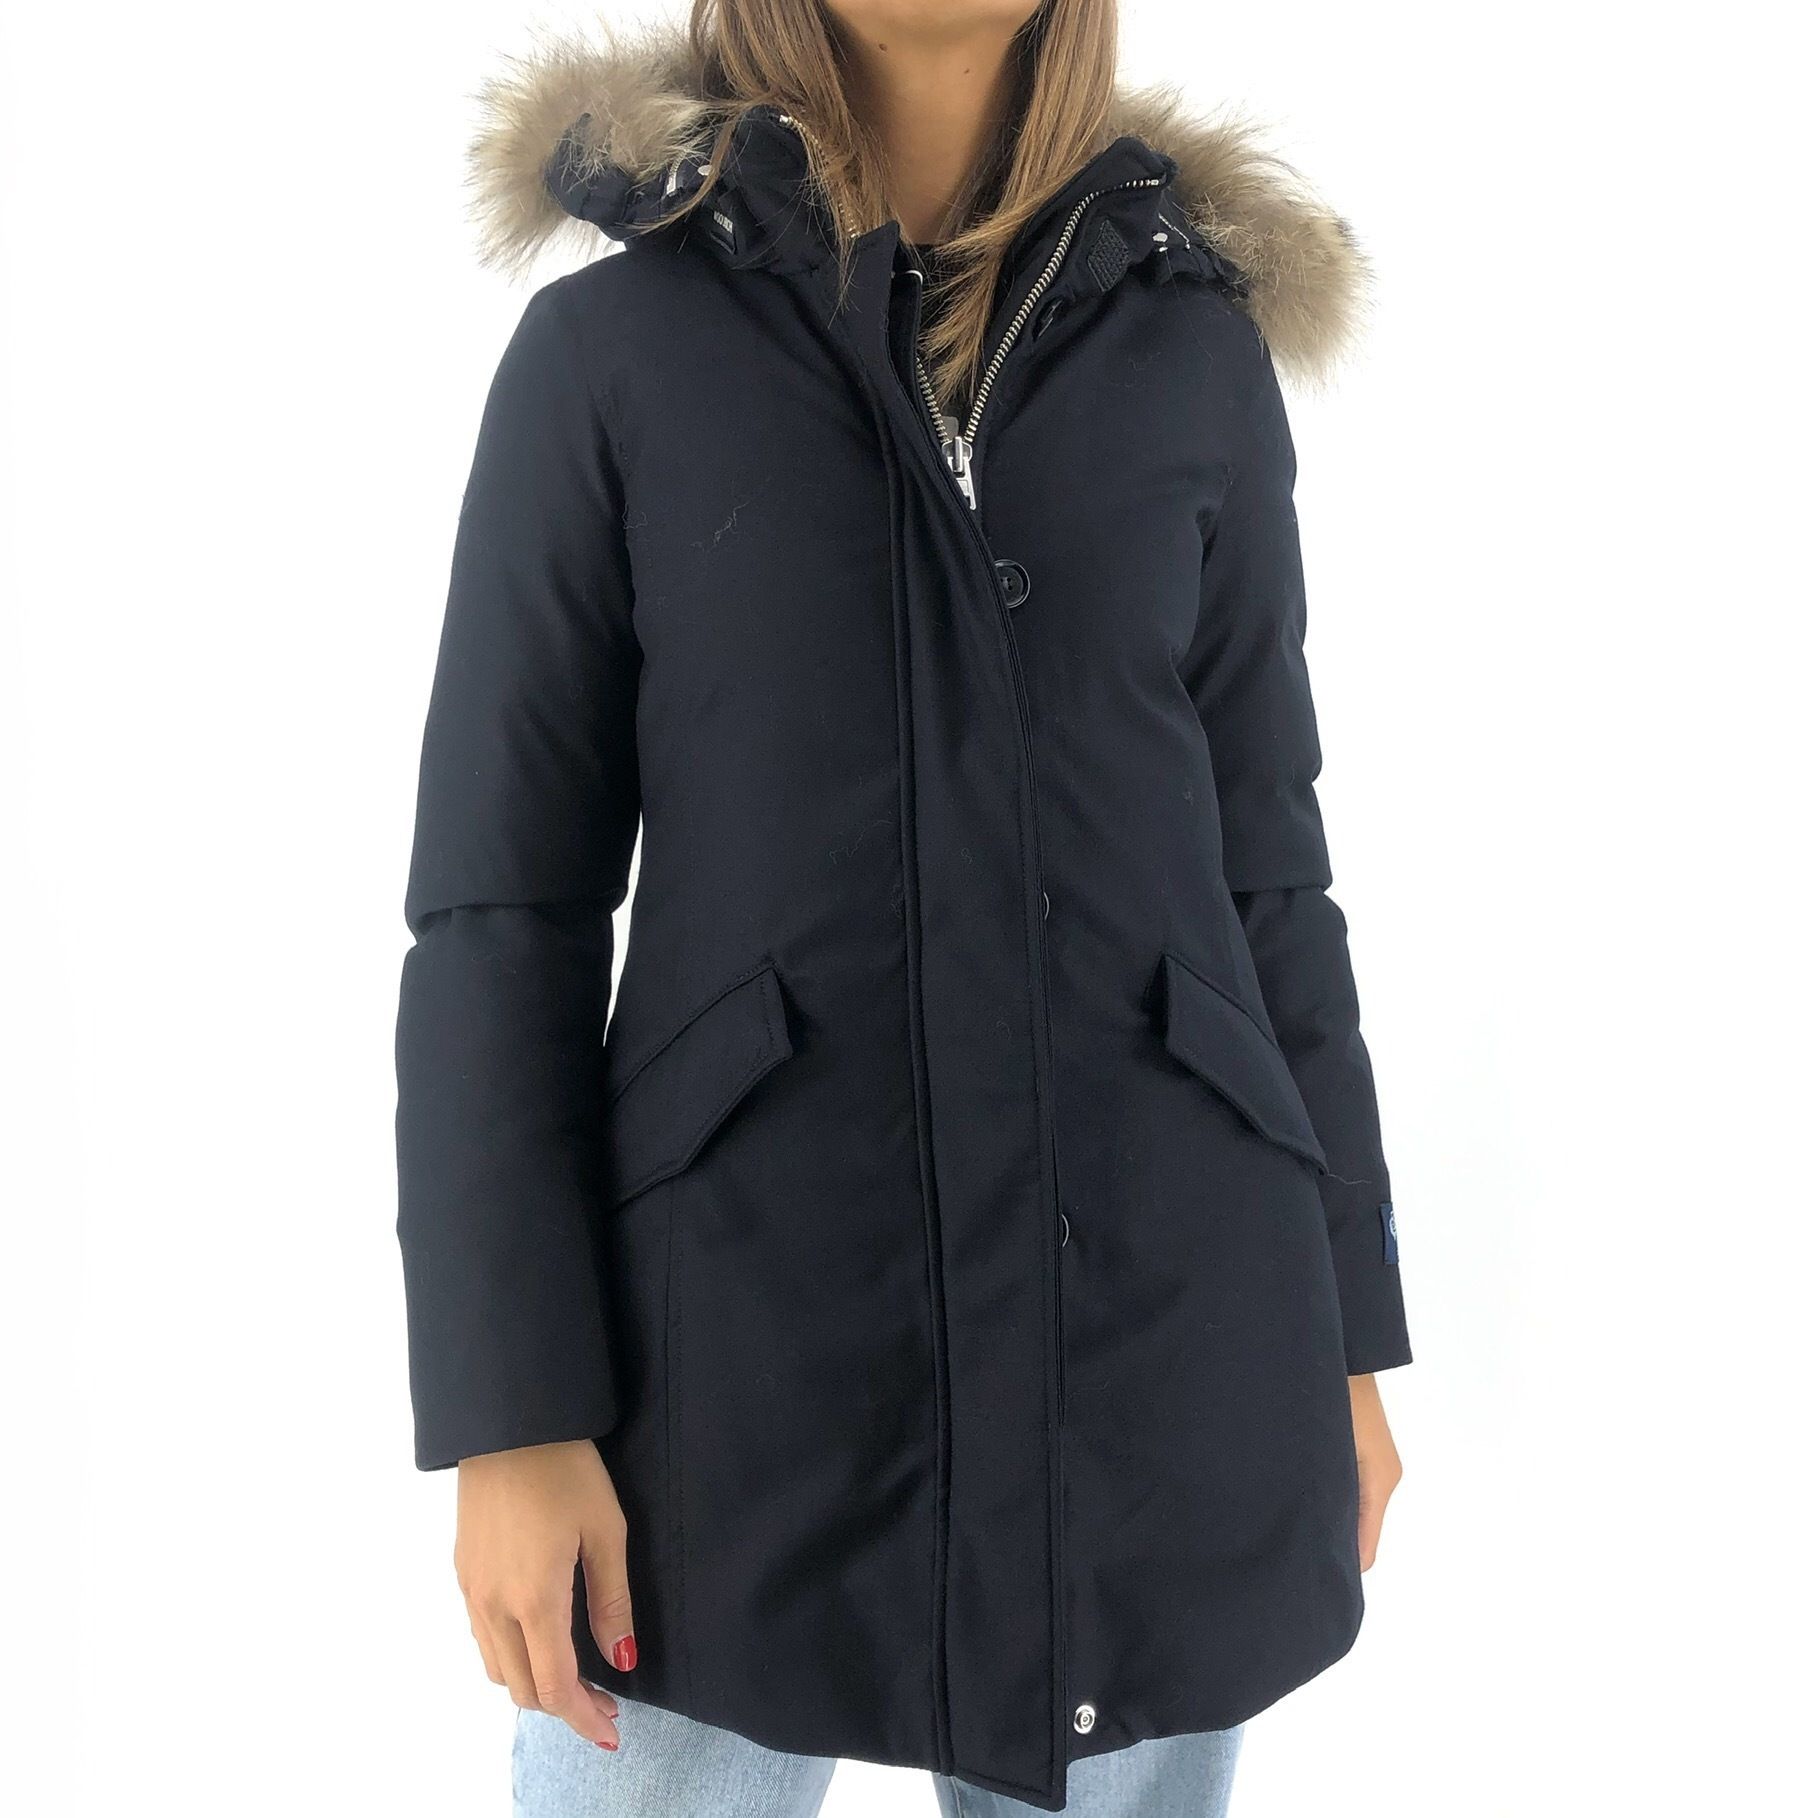 Womens Jackets Woolrich Jackets Woolrich Fur Giacca Luxury Arctic Raccoon Donna Melton Blue in Black 